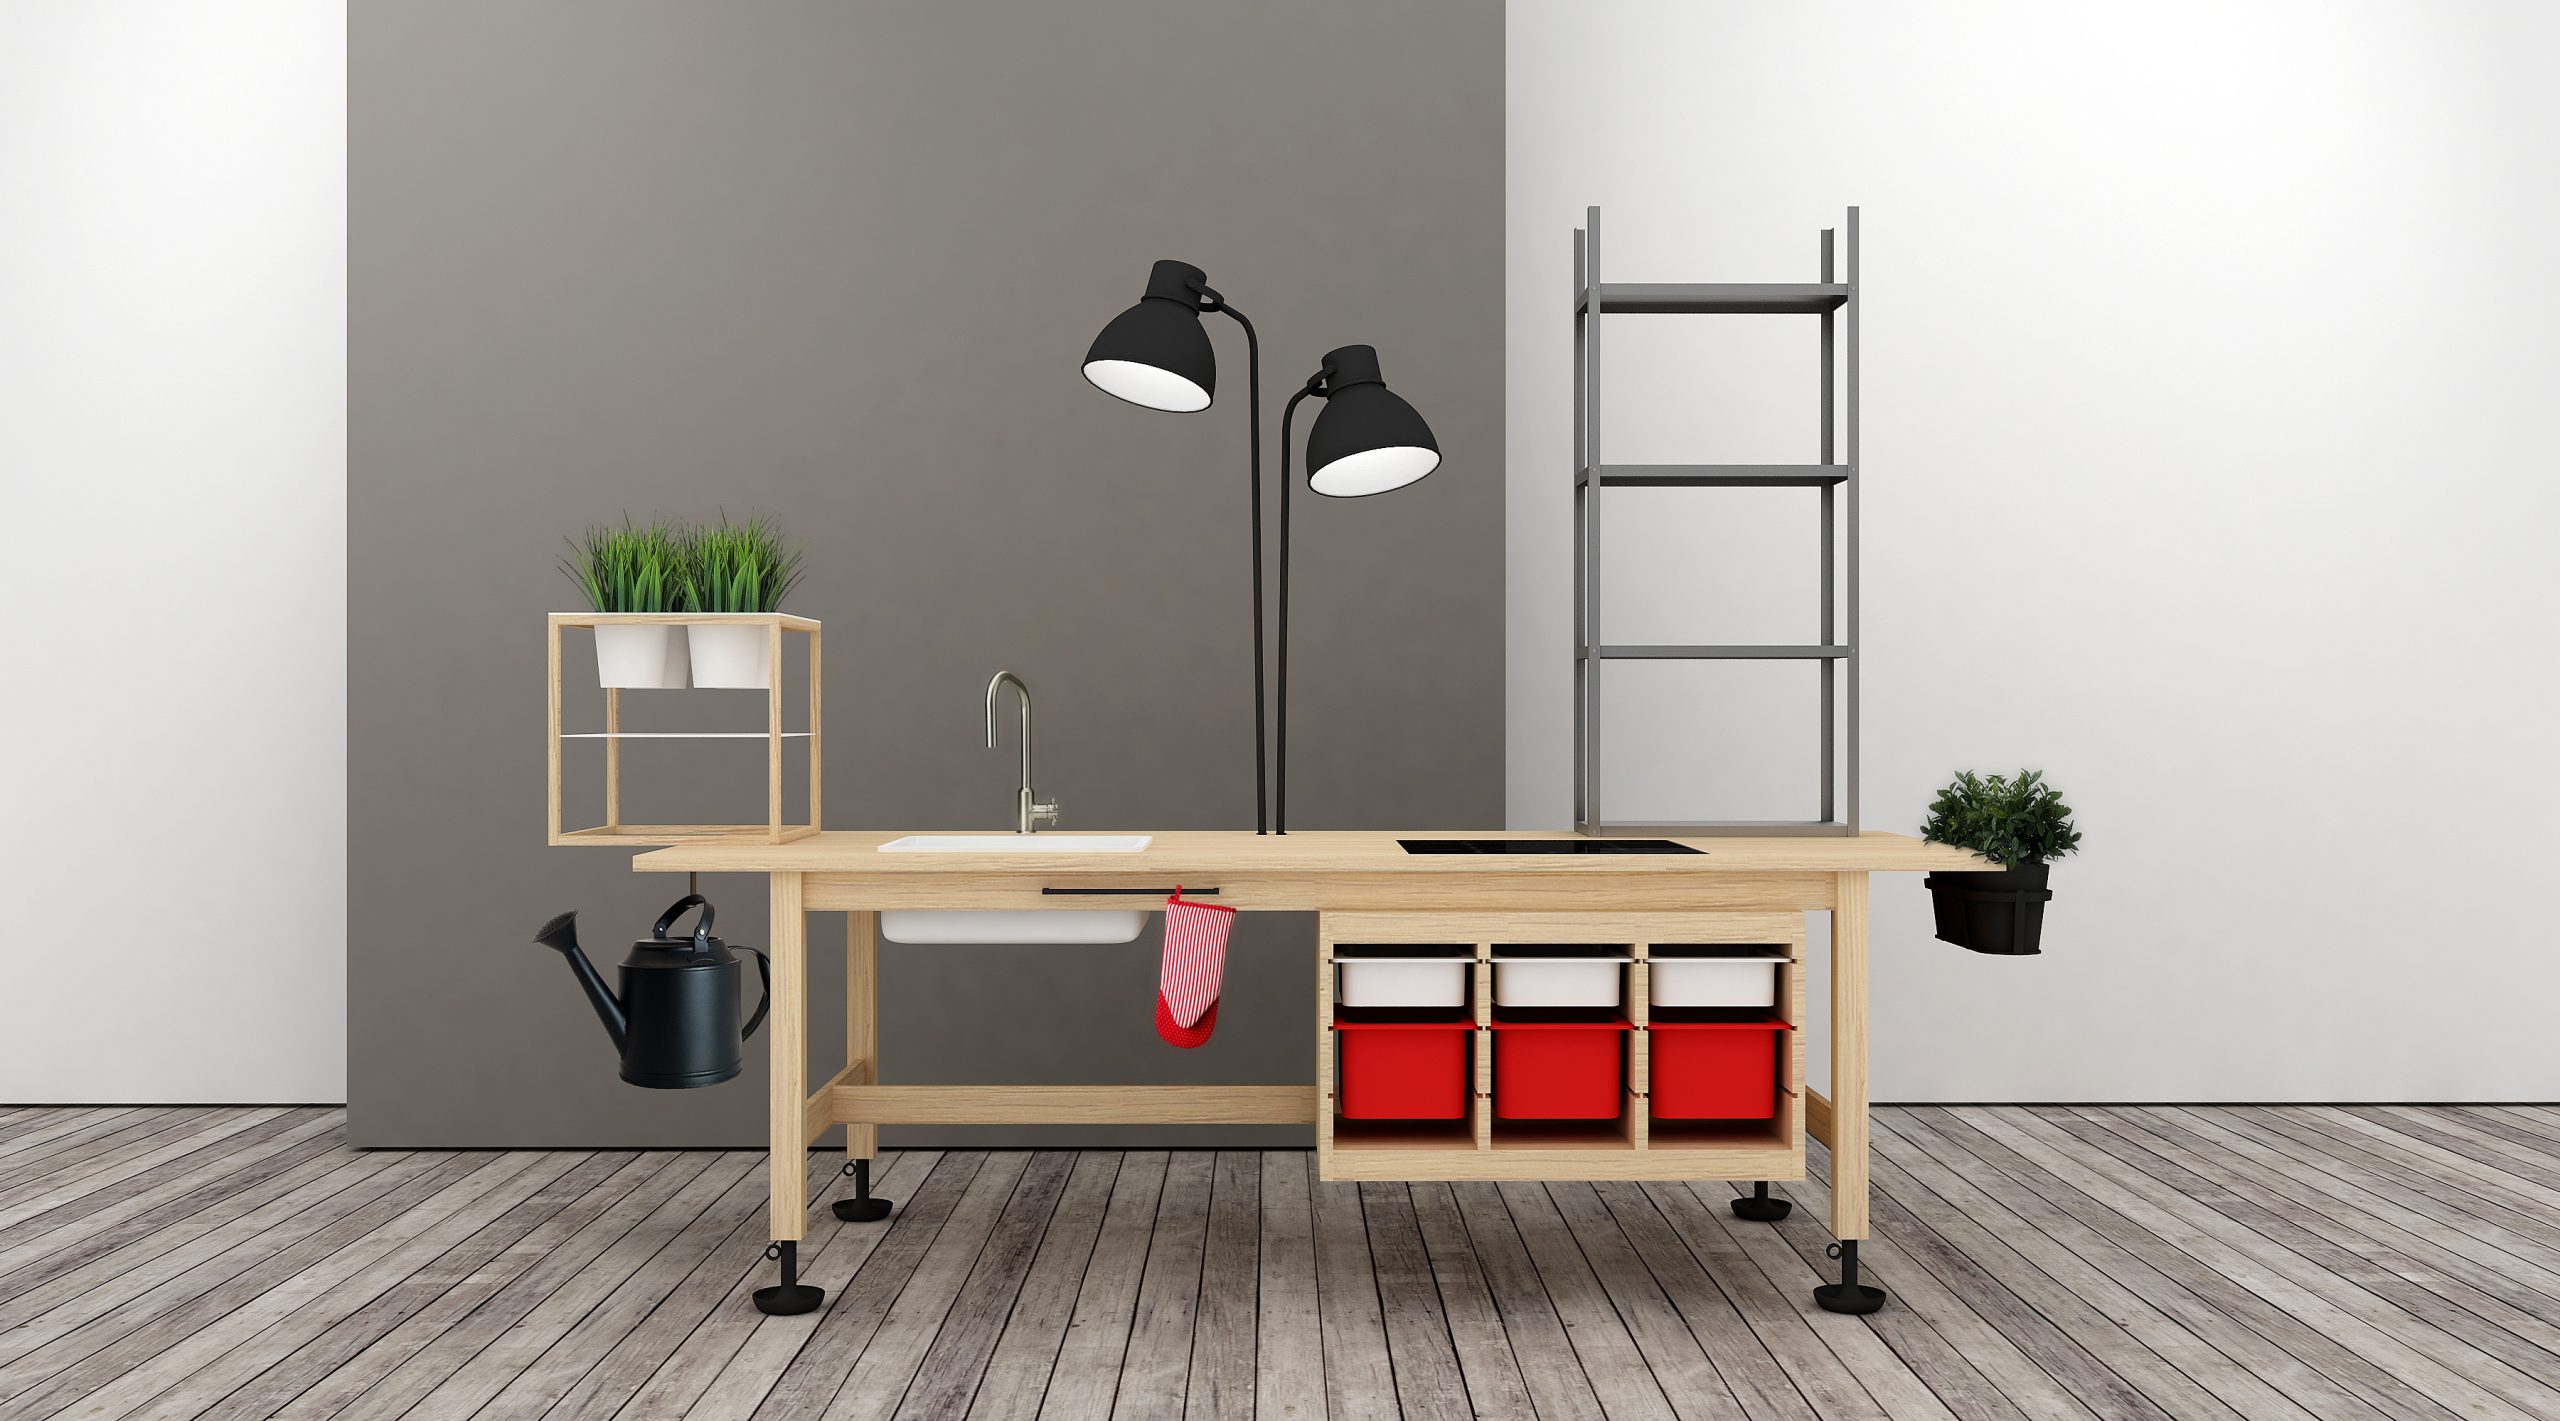 Design District Zagreb Calls Designers & DIYers to Hack IKEA’s Products